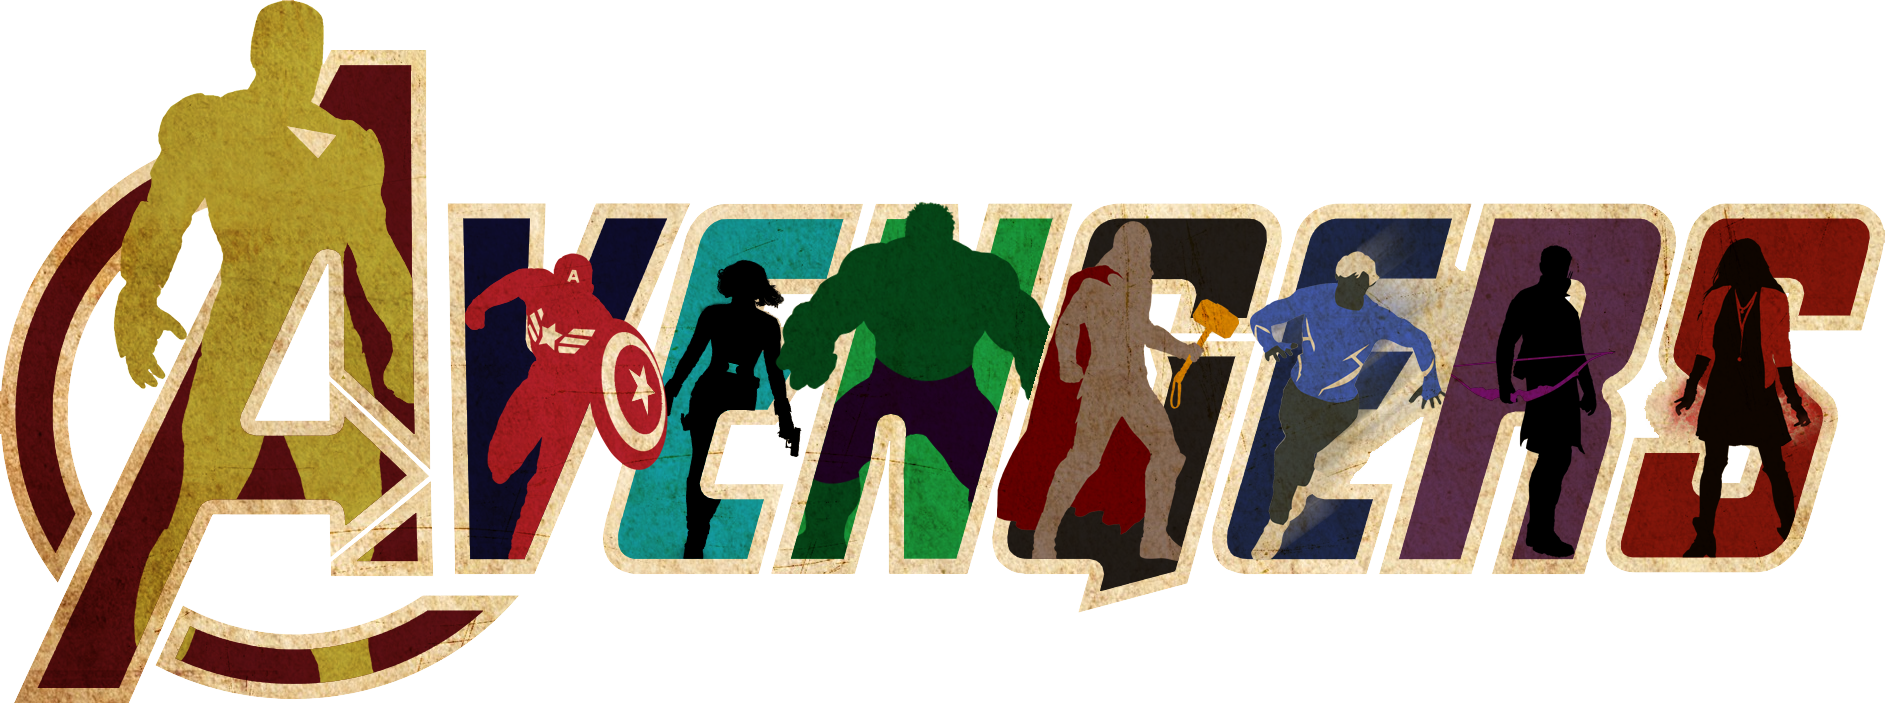 avengers__age_of_ultron_2015_minimalist_logo_png_by_skauf99 d8werwc